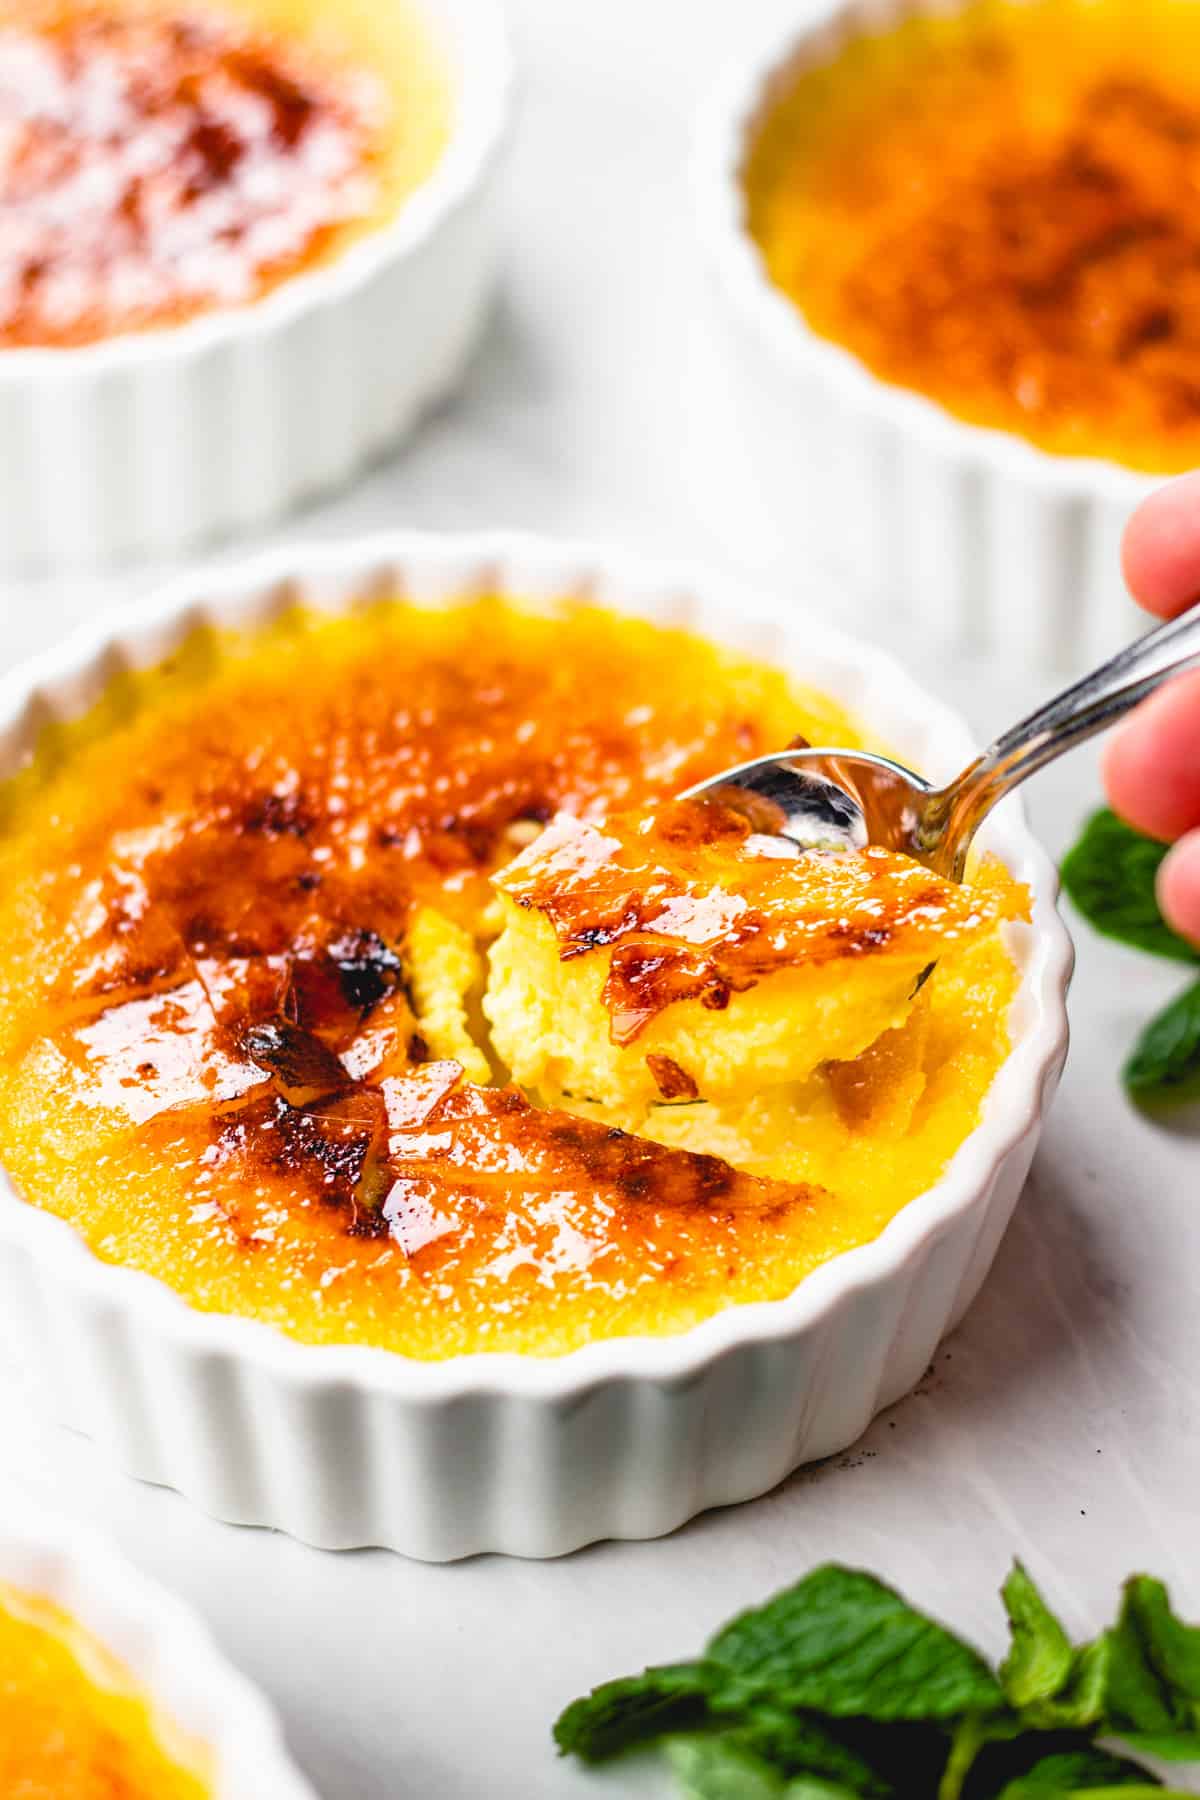 Creme brulee in a white ramekin with a spoon.